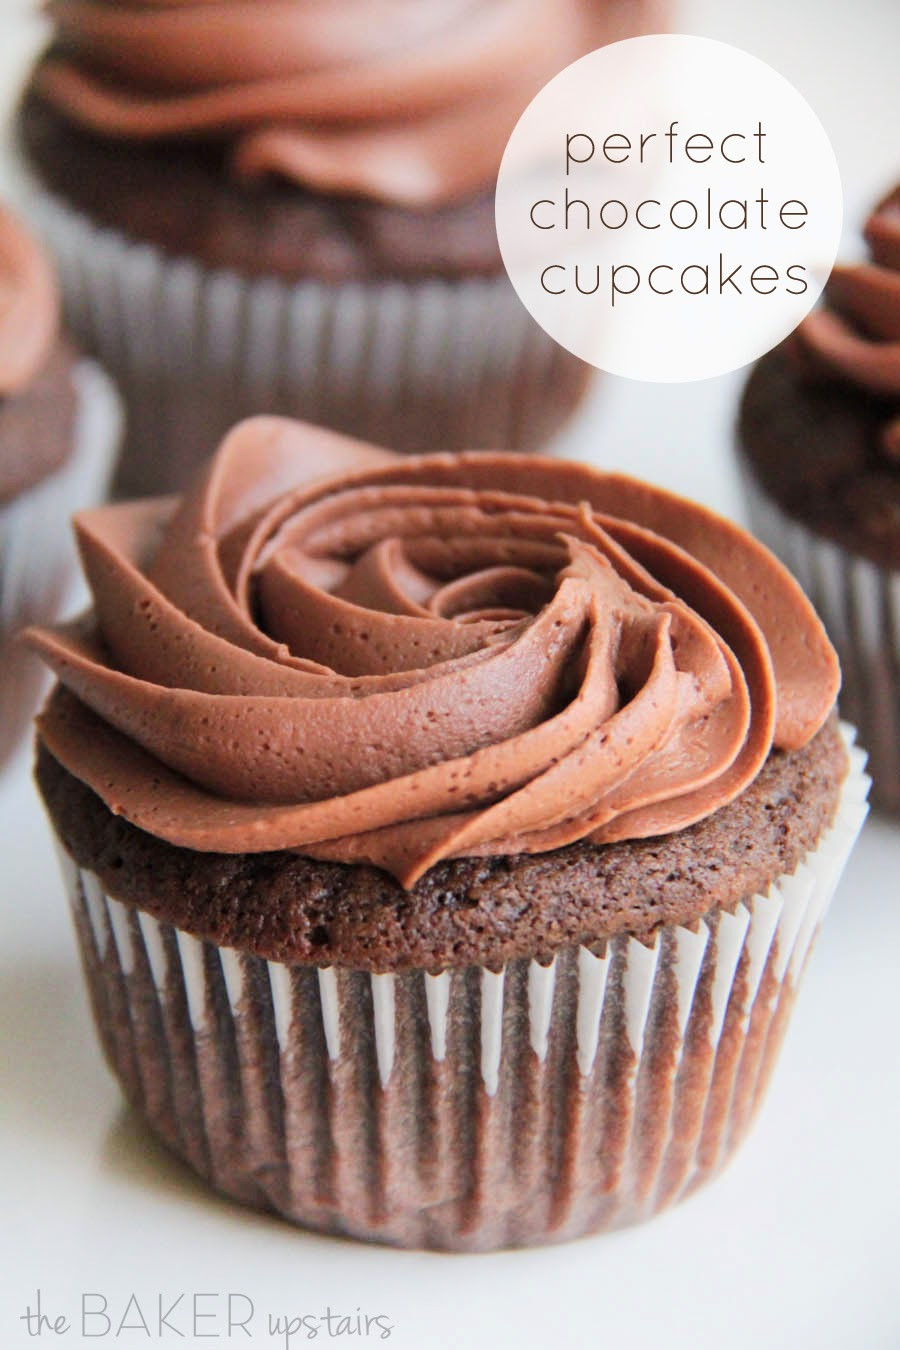 How To Make Chocolate Cupcakes The Baker Upstairs perfect chocolate cupcakes